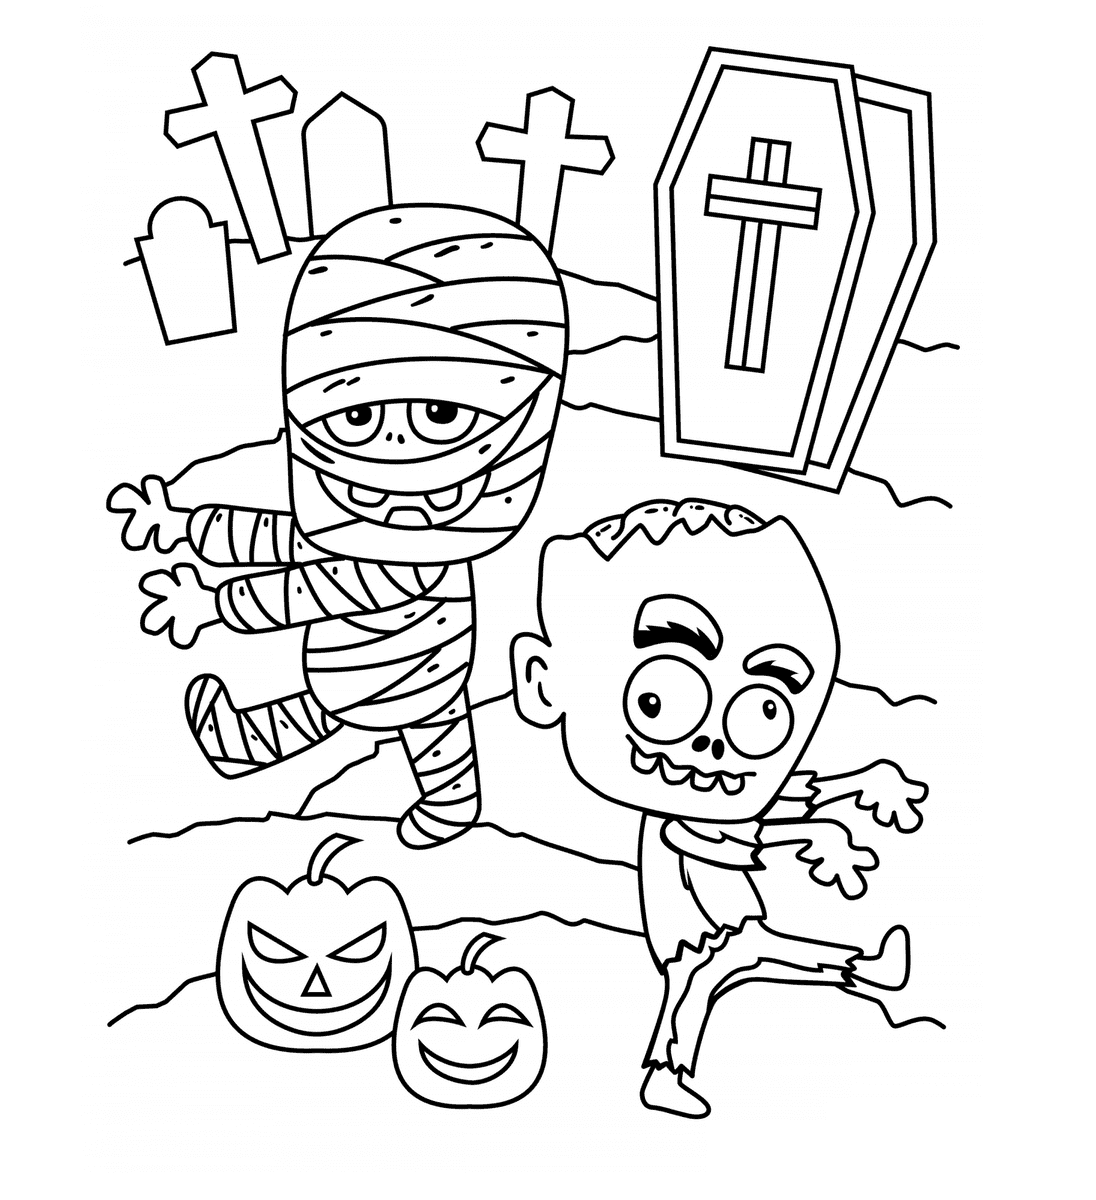 kids-zombie-skeleton-coloring-pages